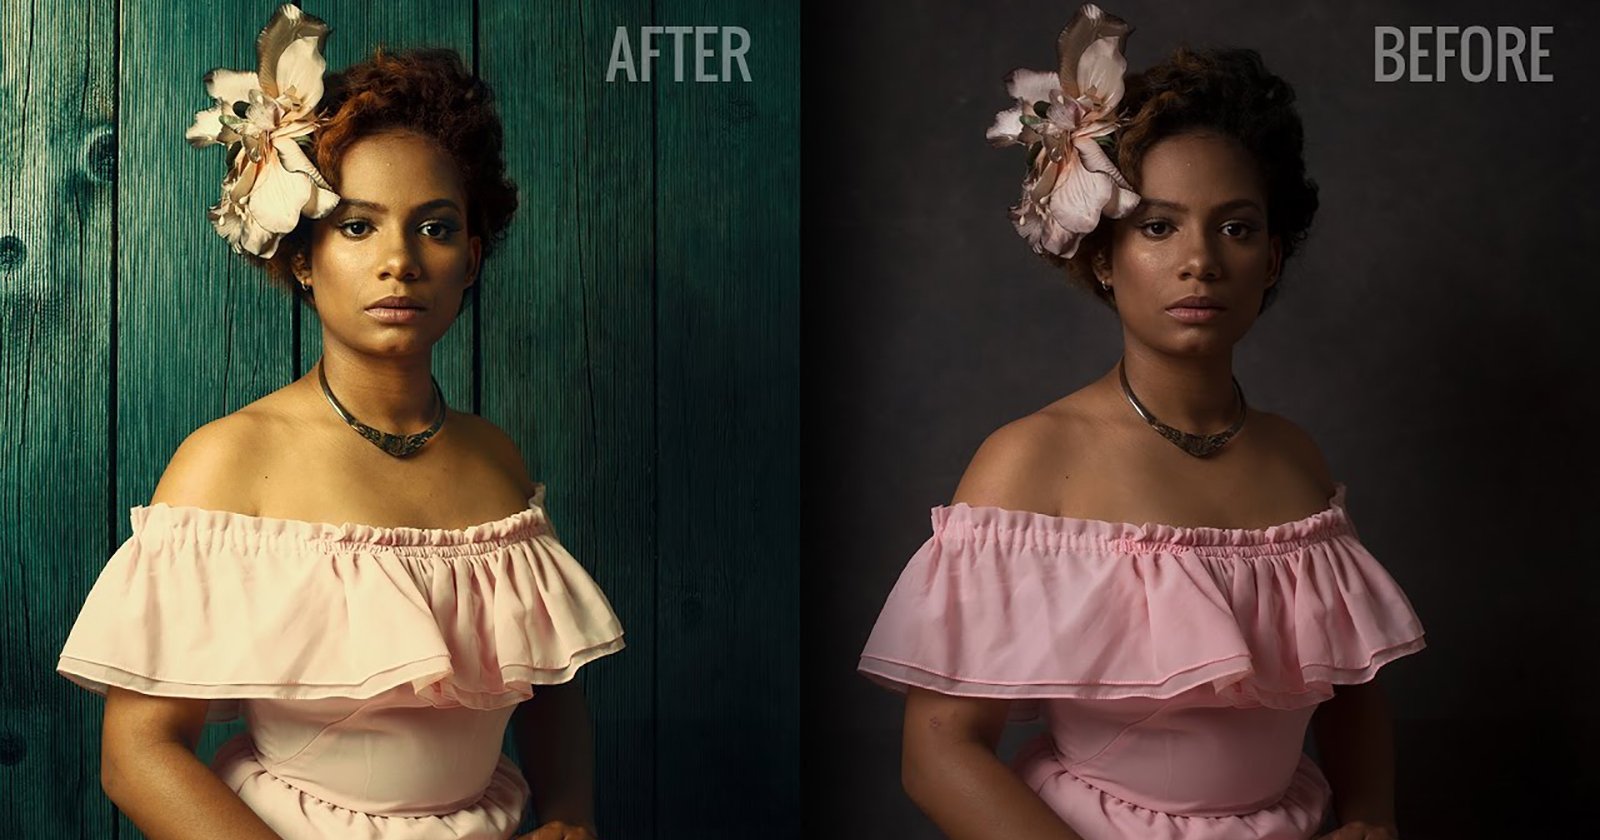 Photoshop Trick: How to Swap a Photo Background Using Only Blend Modes